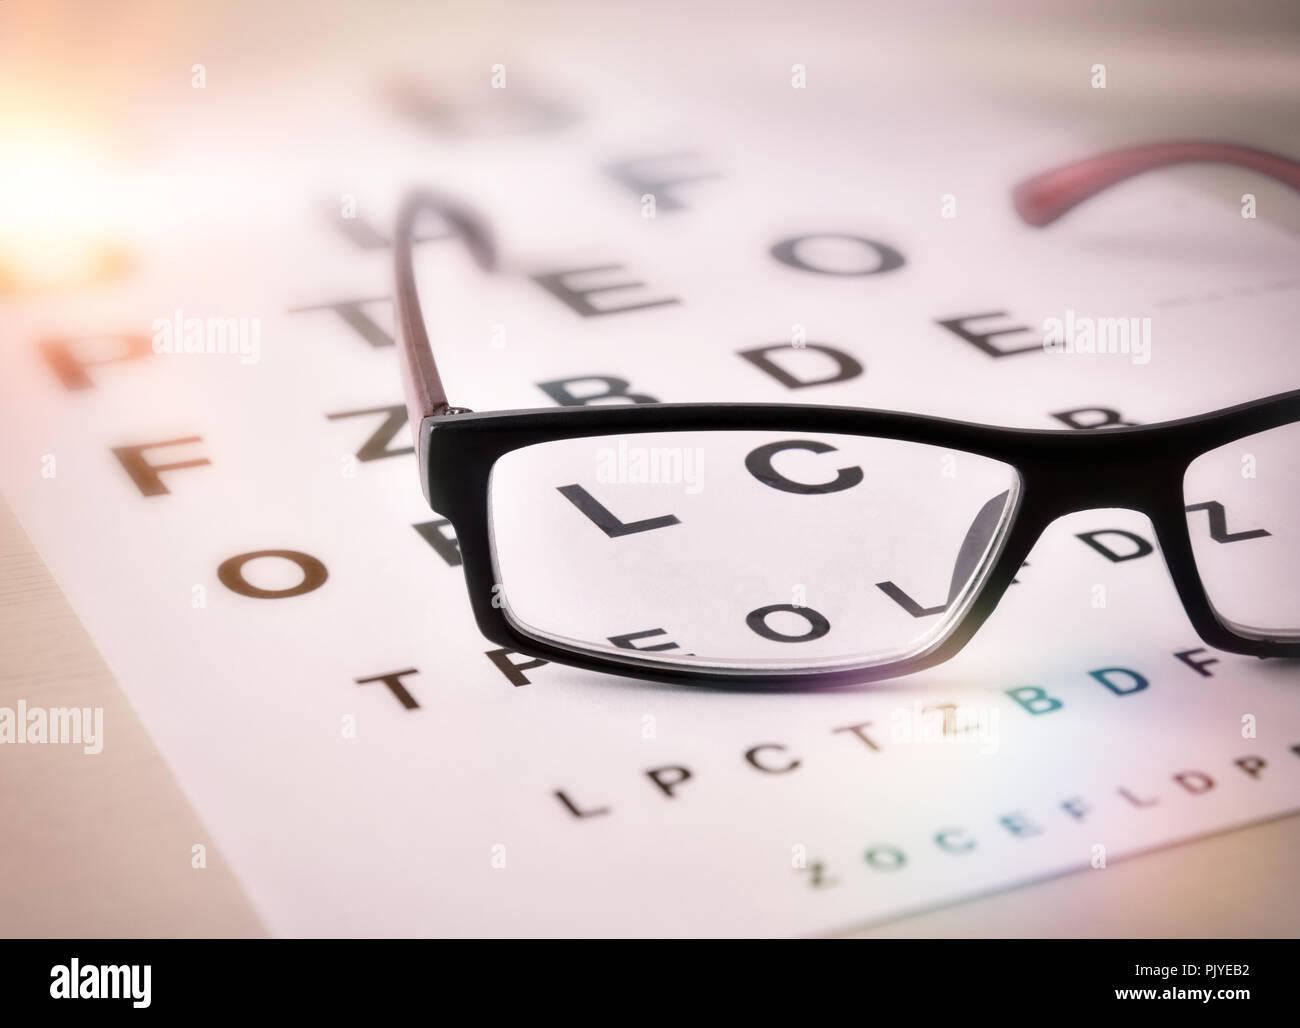 Concept of eye revision with sheet with letters and correction glasses. Elevated view. Horizontal composition Stock Photo